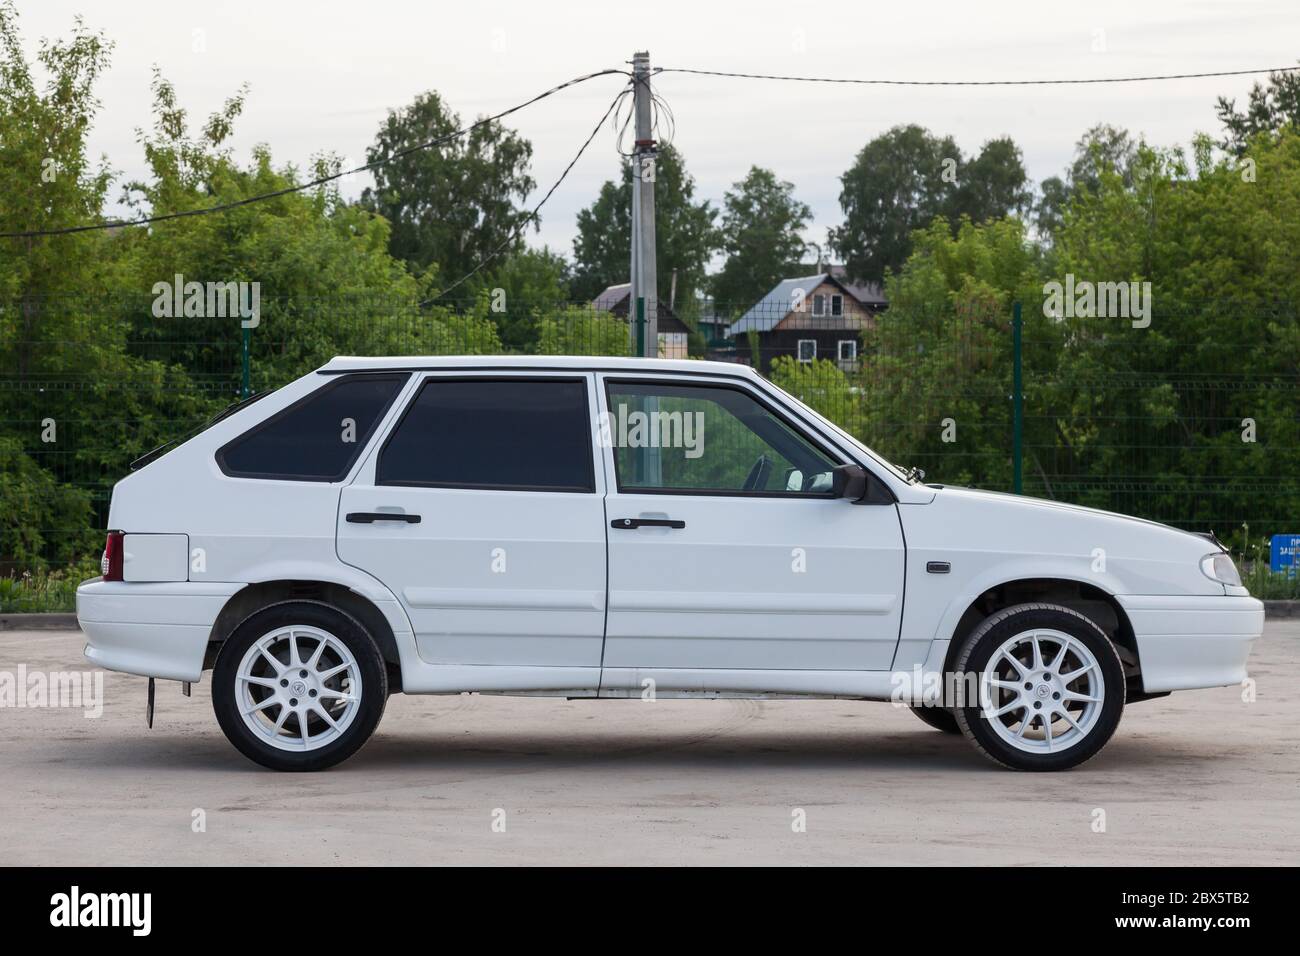 Novosibirsk, Russia - 05.20.2020: White Russian car sedan brand LADA model 2114 side with wheels and a summer tire on a background of green trees and Stock Photo